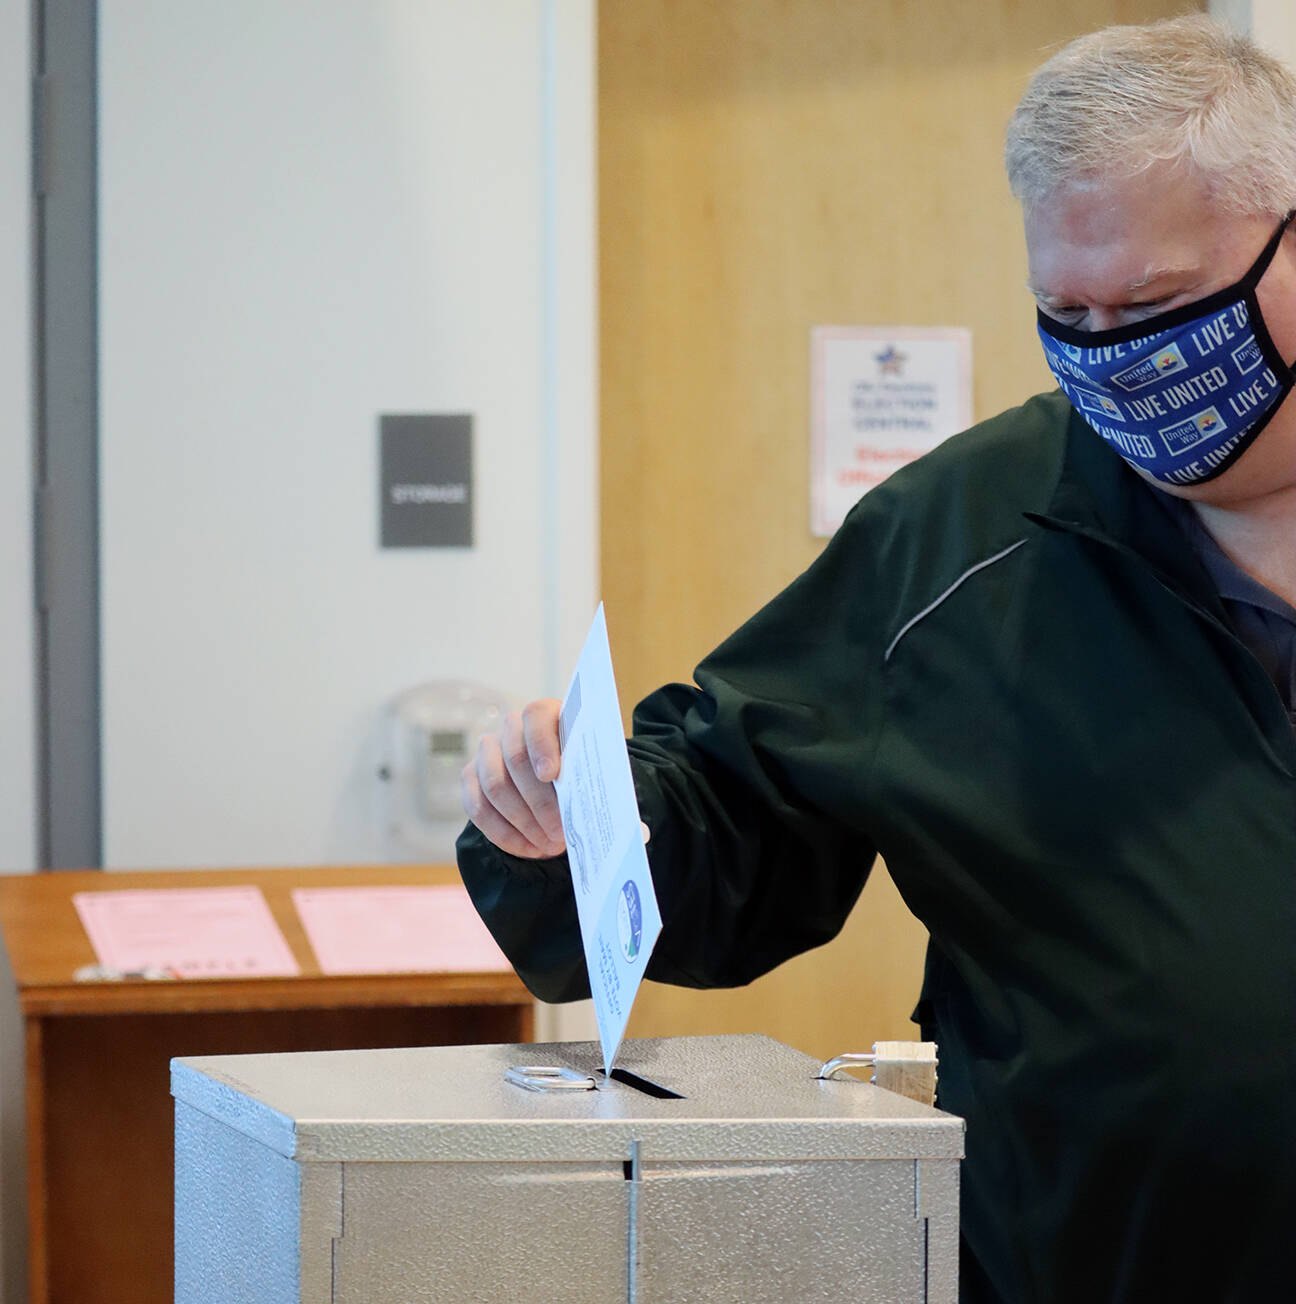 School board member Emil Mackey places a ballot in the drop box at the Mendenhall Public Library vote center on Tuesday.Two seats on the City and Borough of Juneau Assembly and three seats on the Juneau School District Board of Education are up for grabs in the 2021 municipal election. (Ben Hohenstatt / Juneau Empire)